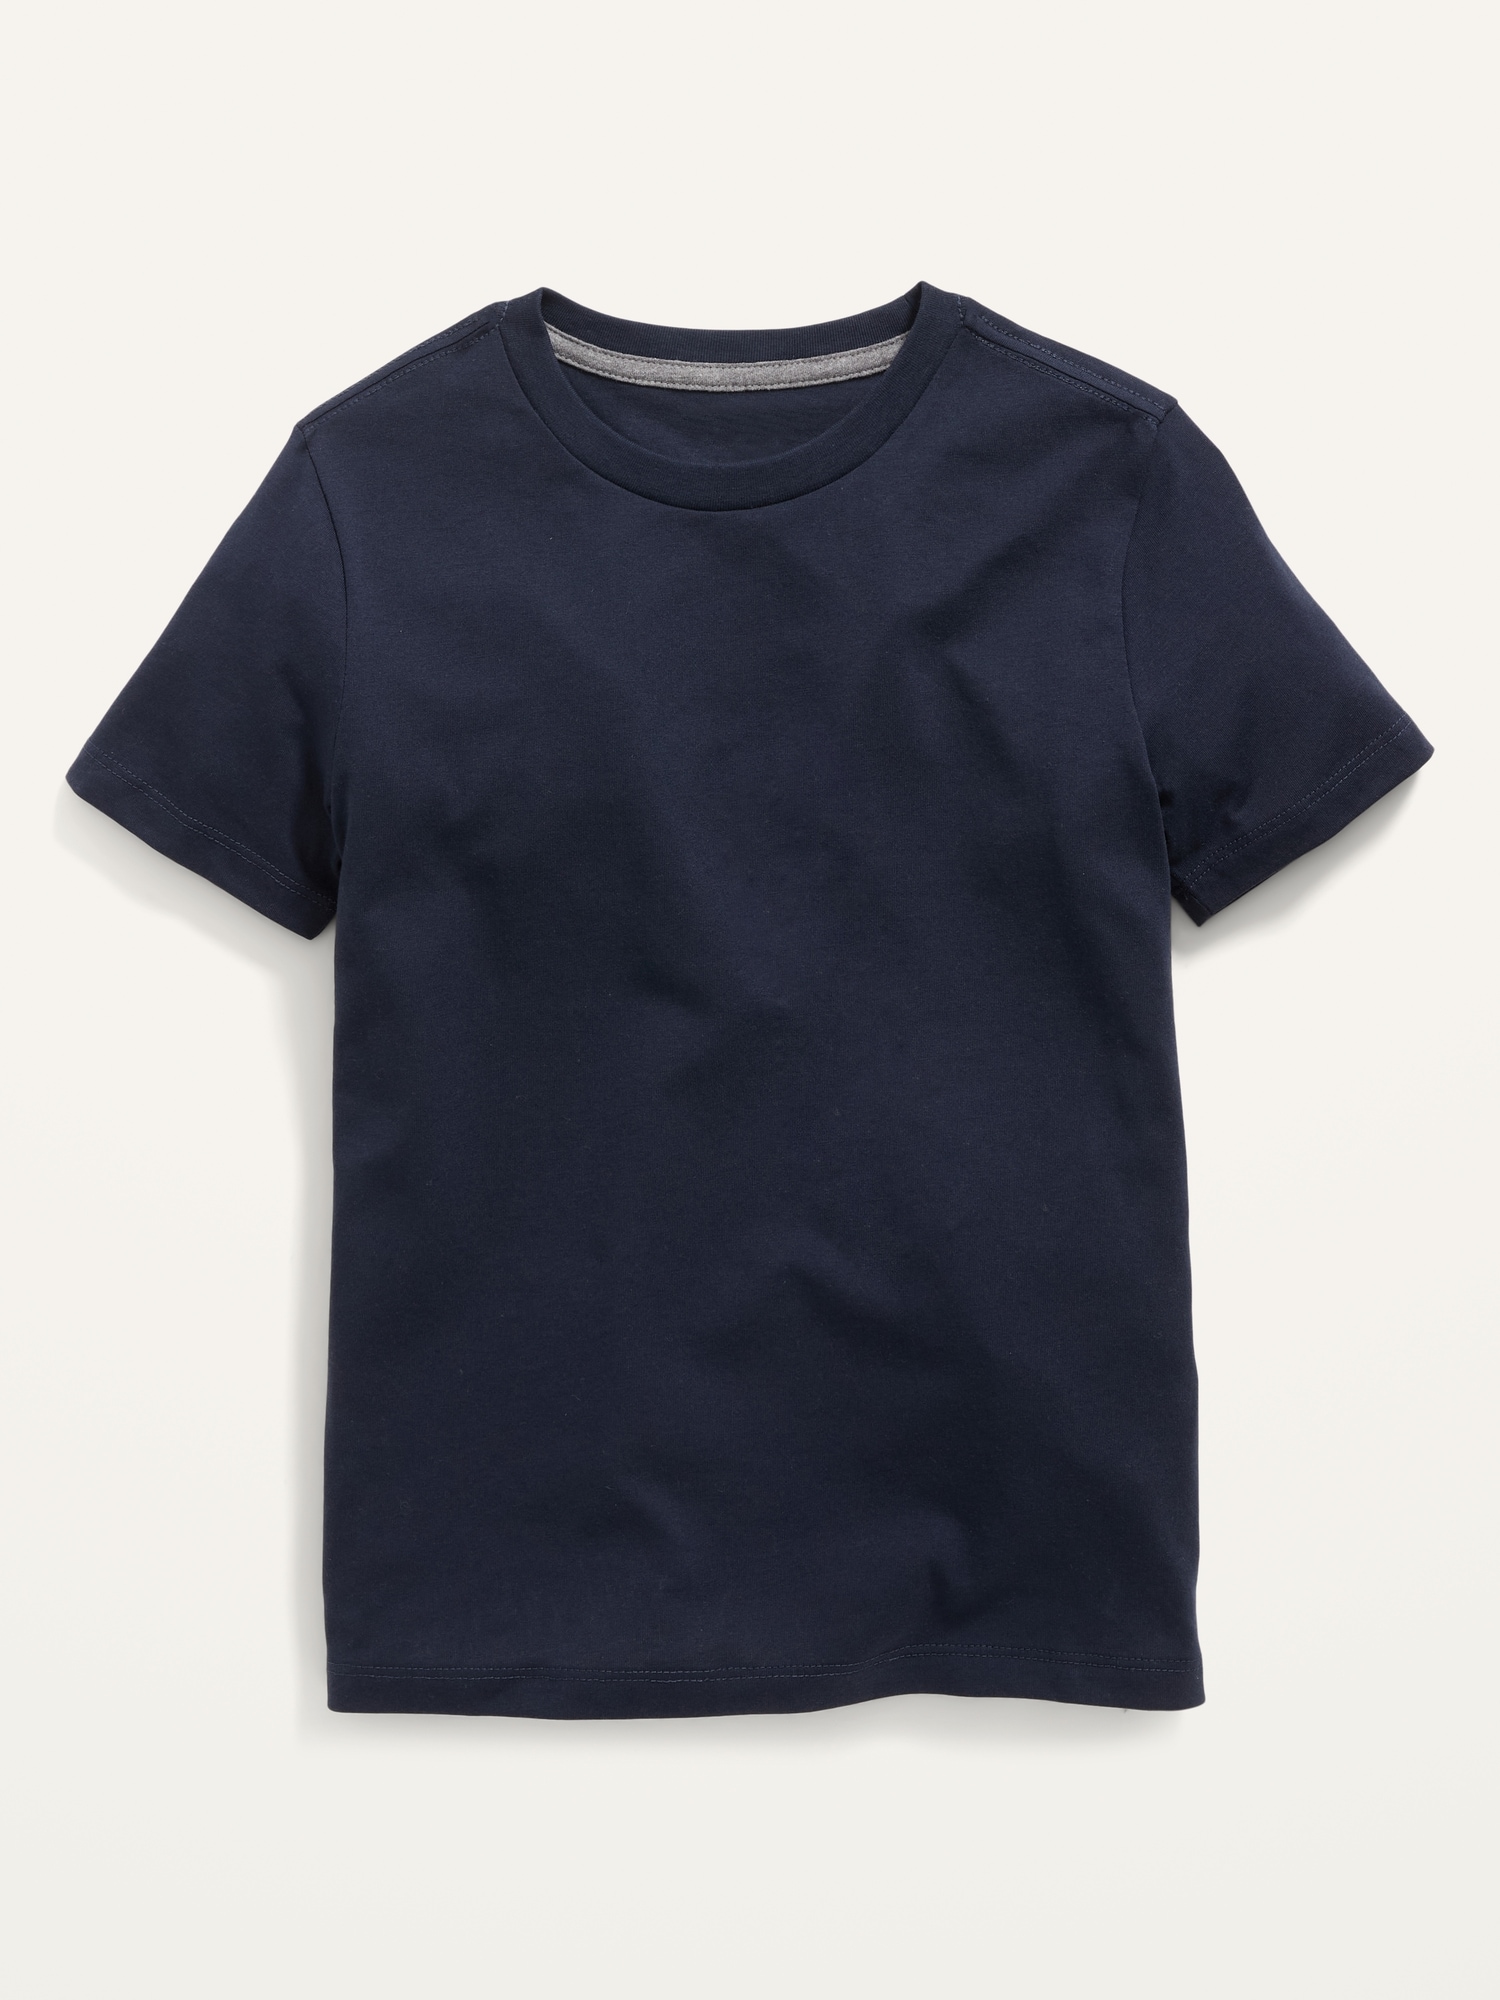 Old Navy Softest Crew-Neck T-Shirt for Boys blue. 1